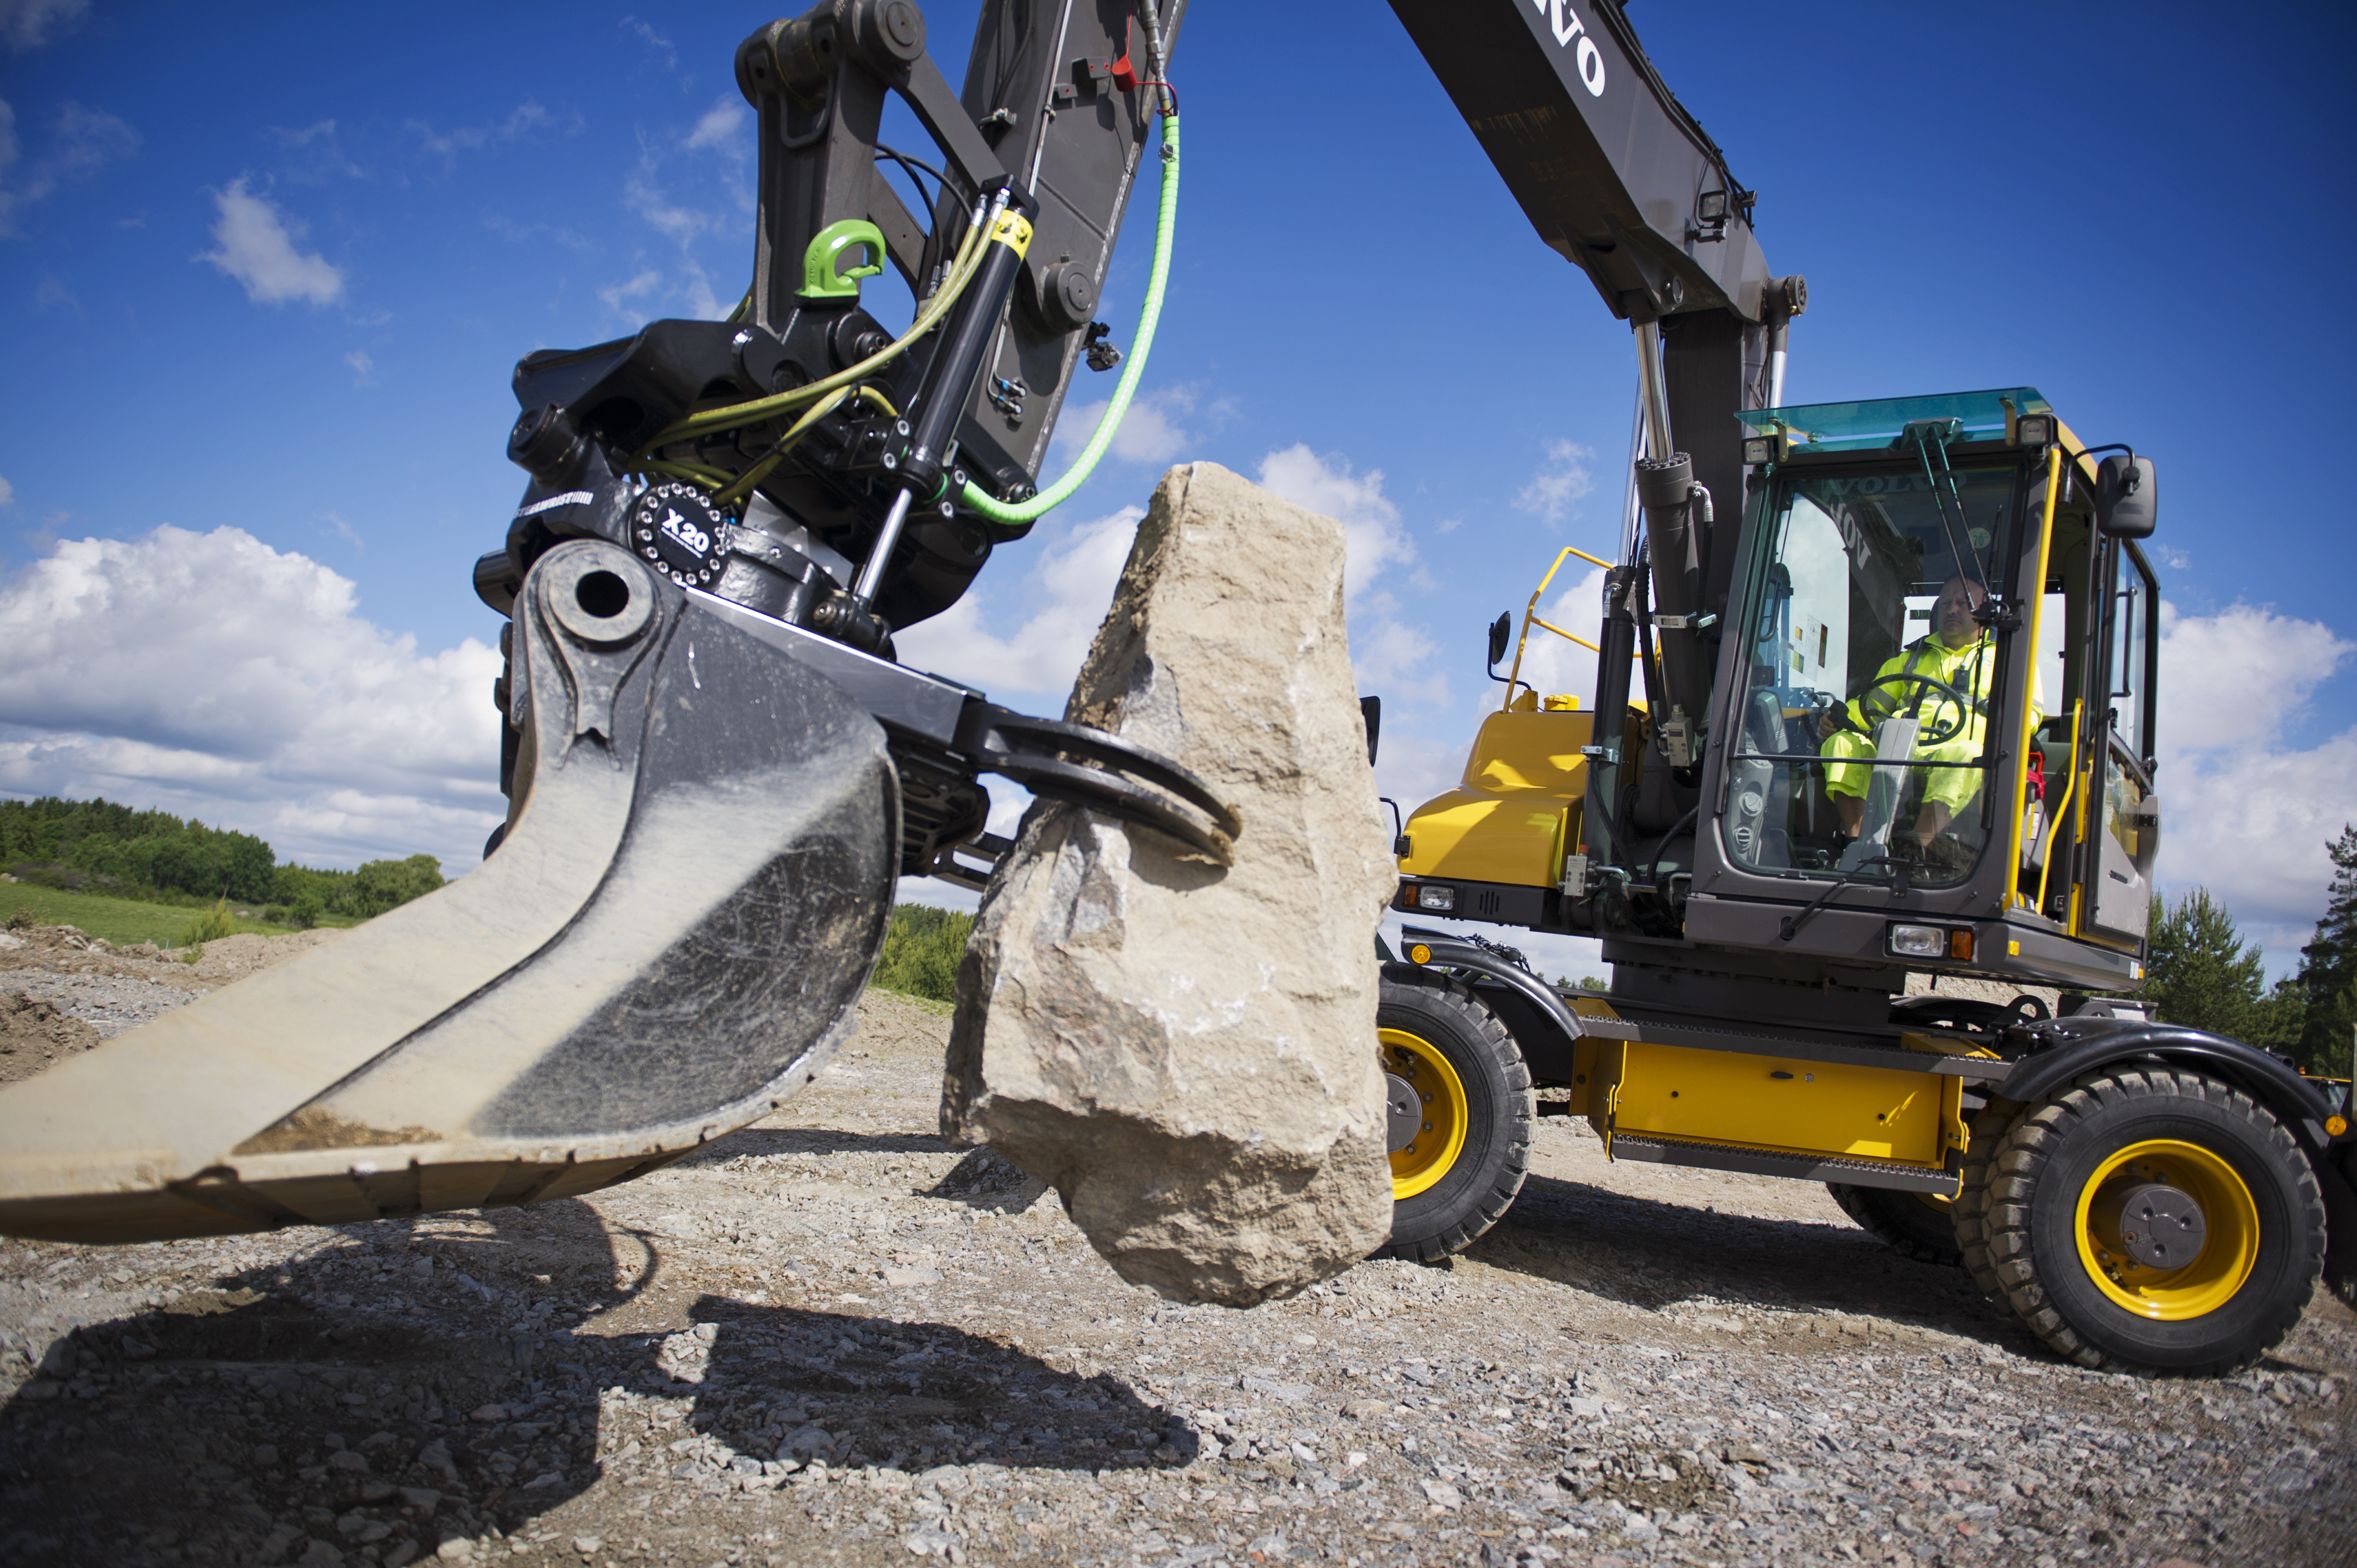 Volvo excavator with tiltrotator grasping a large rock